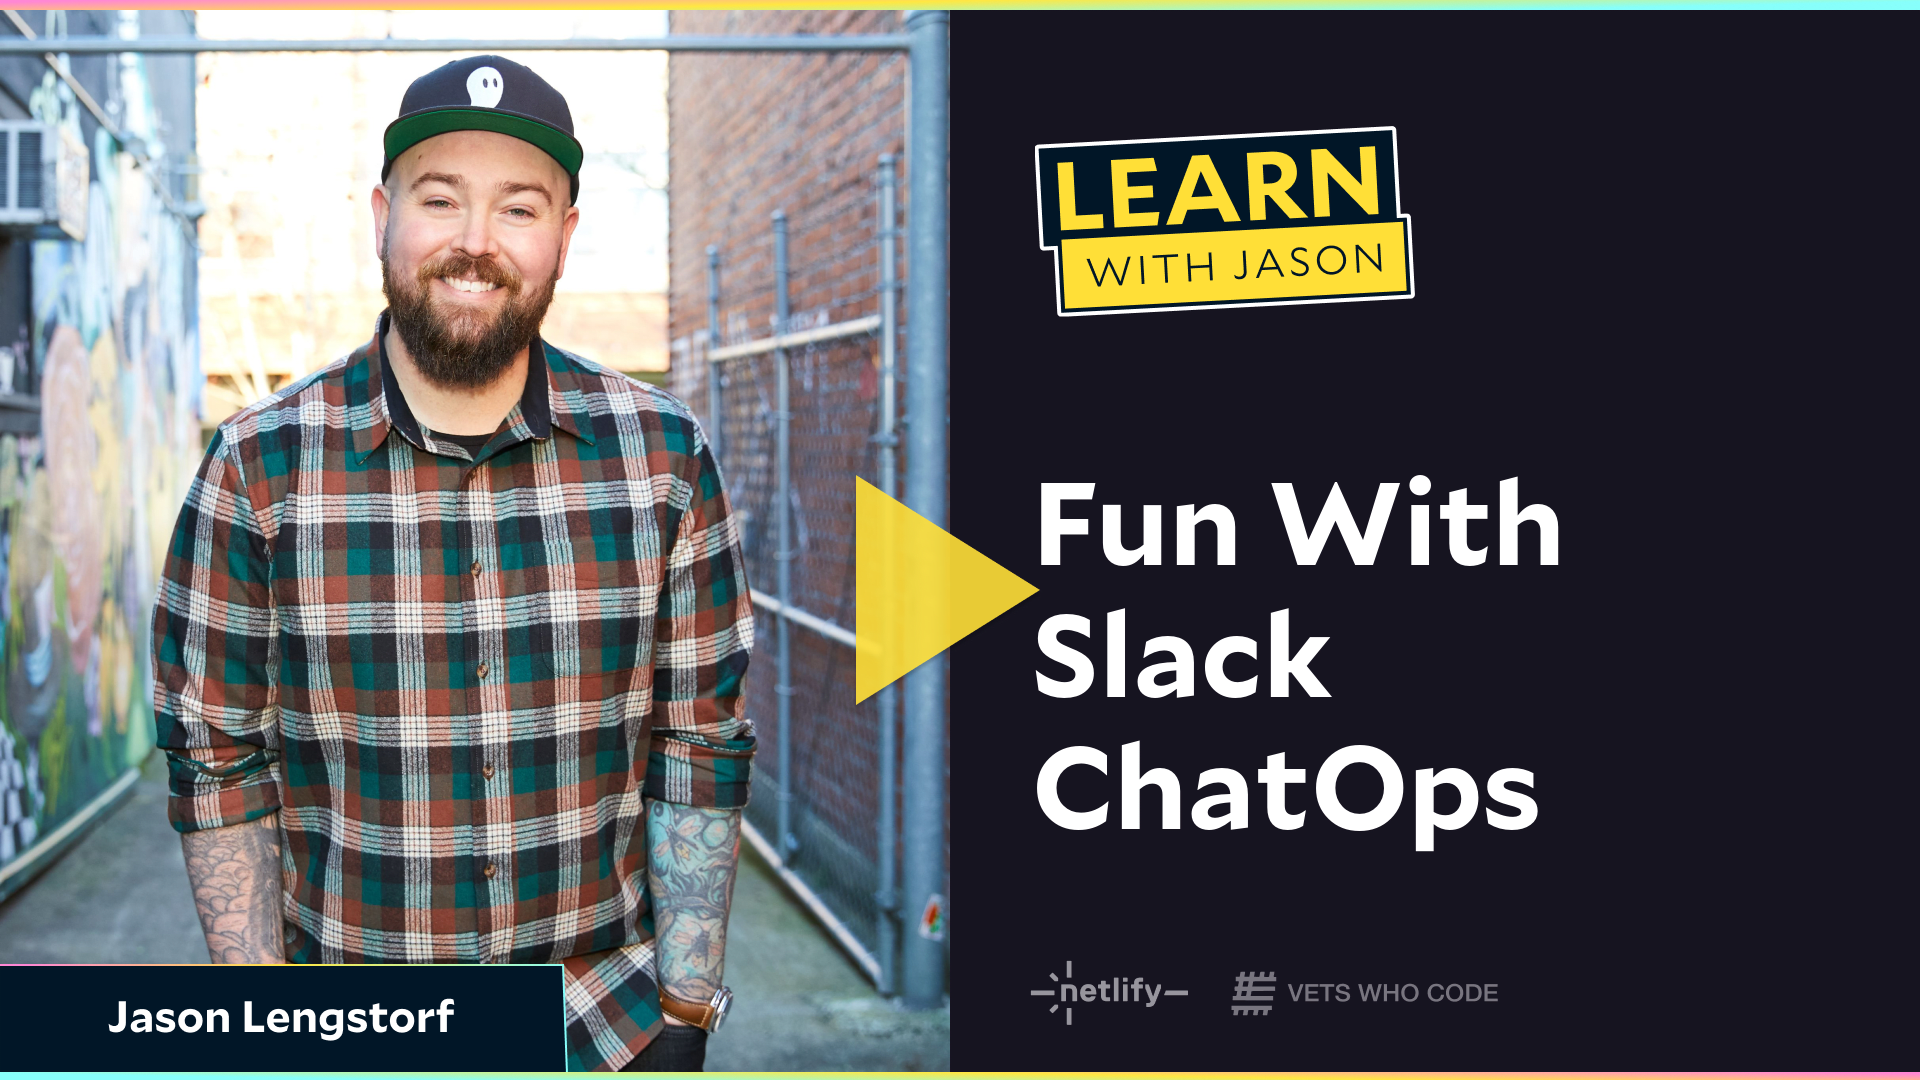 Fun With Slack ChatOps (with Jason Lengstorf)